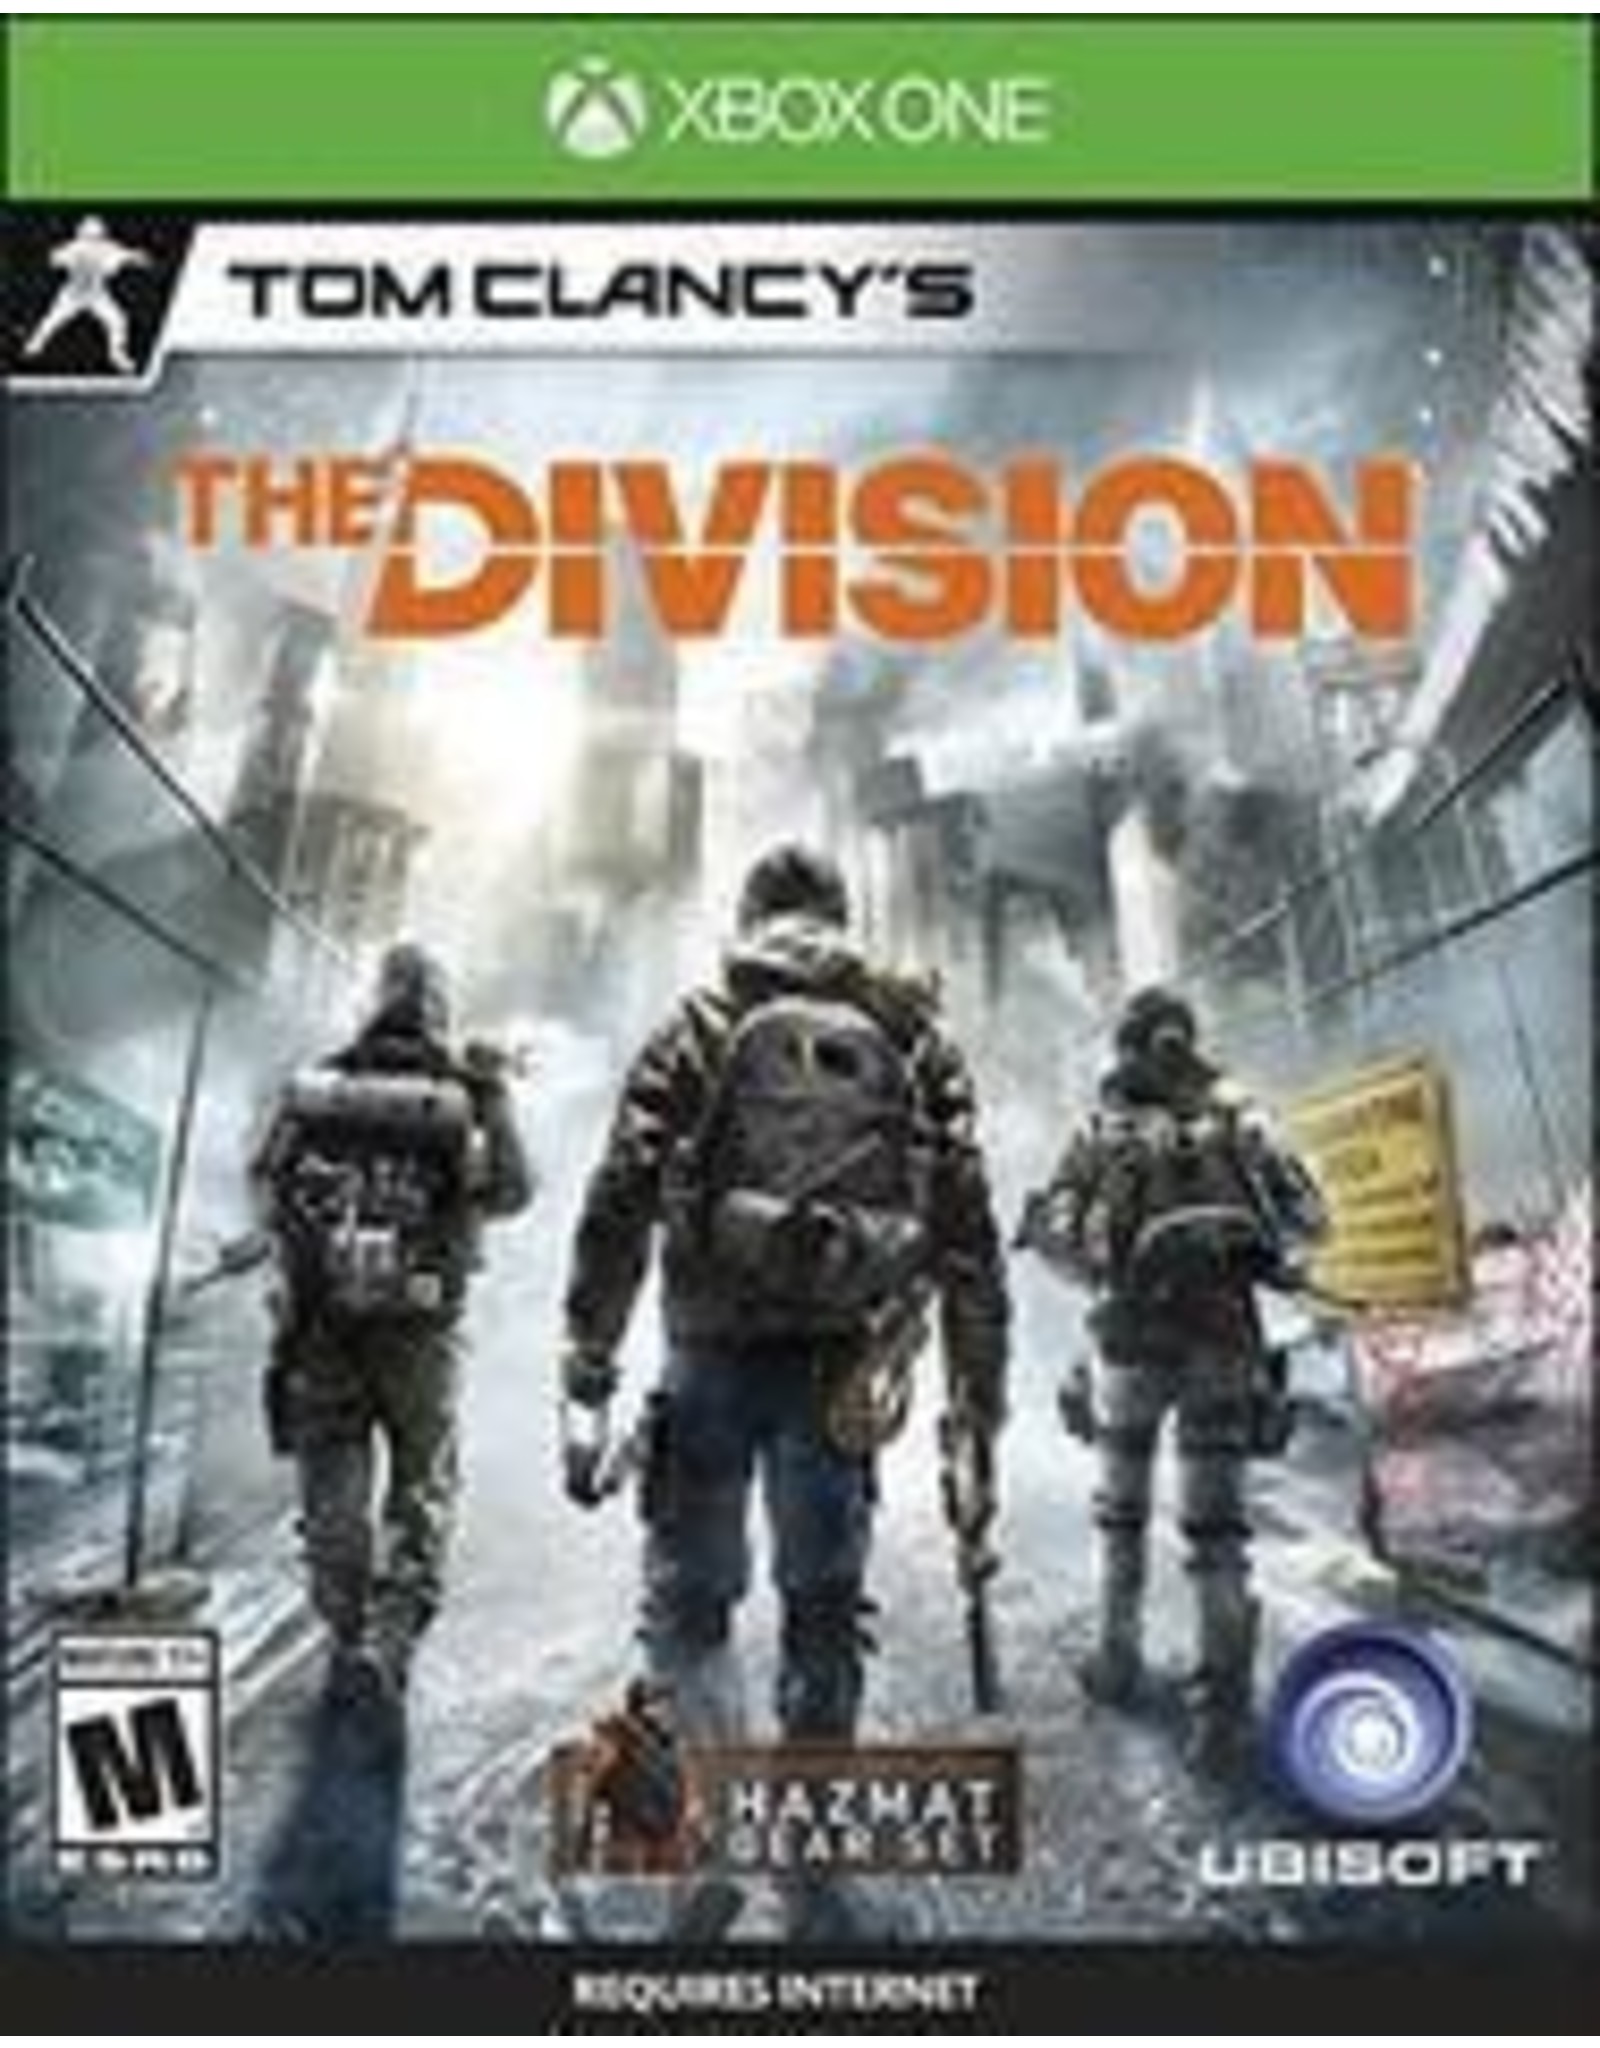 Xbox One Tom Clancy's The Division (CiB)